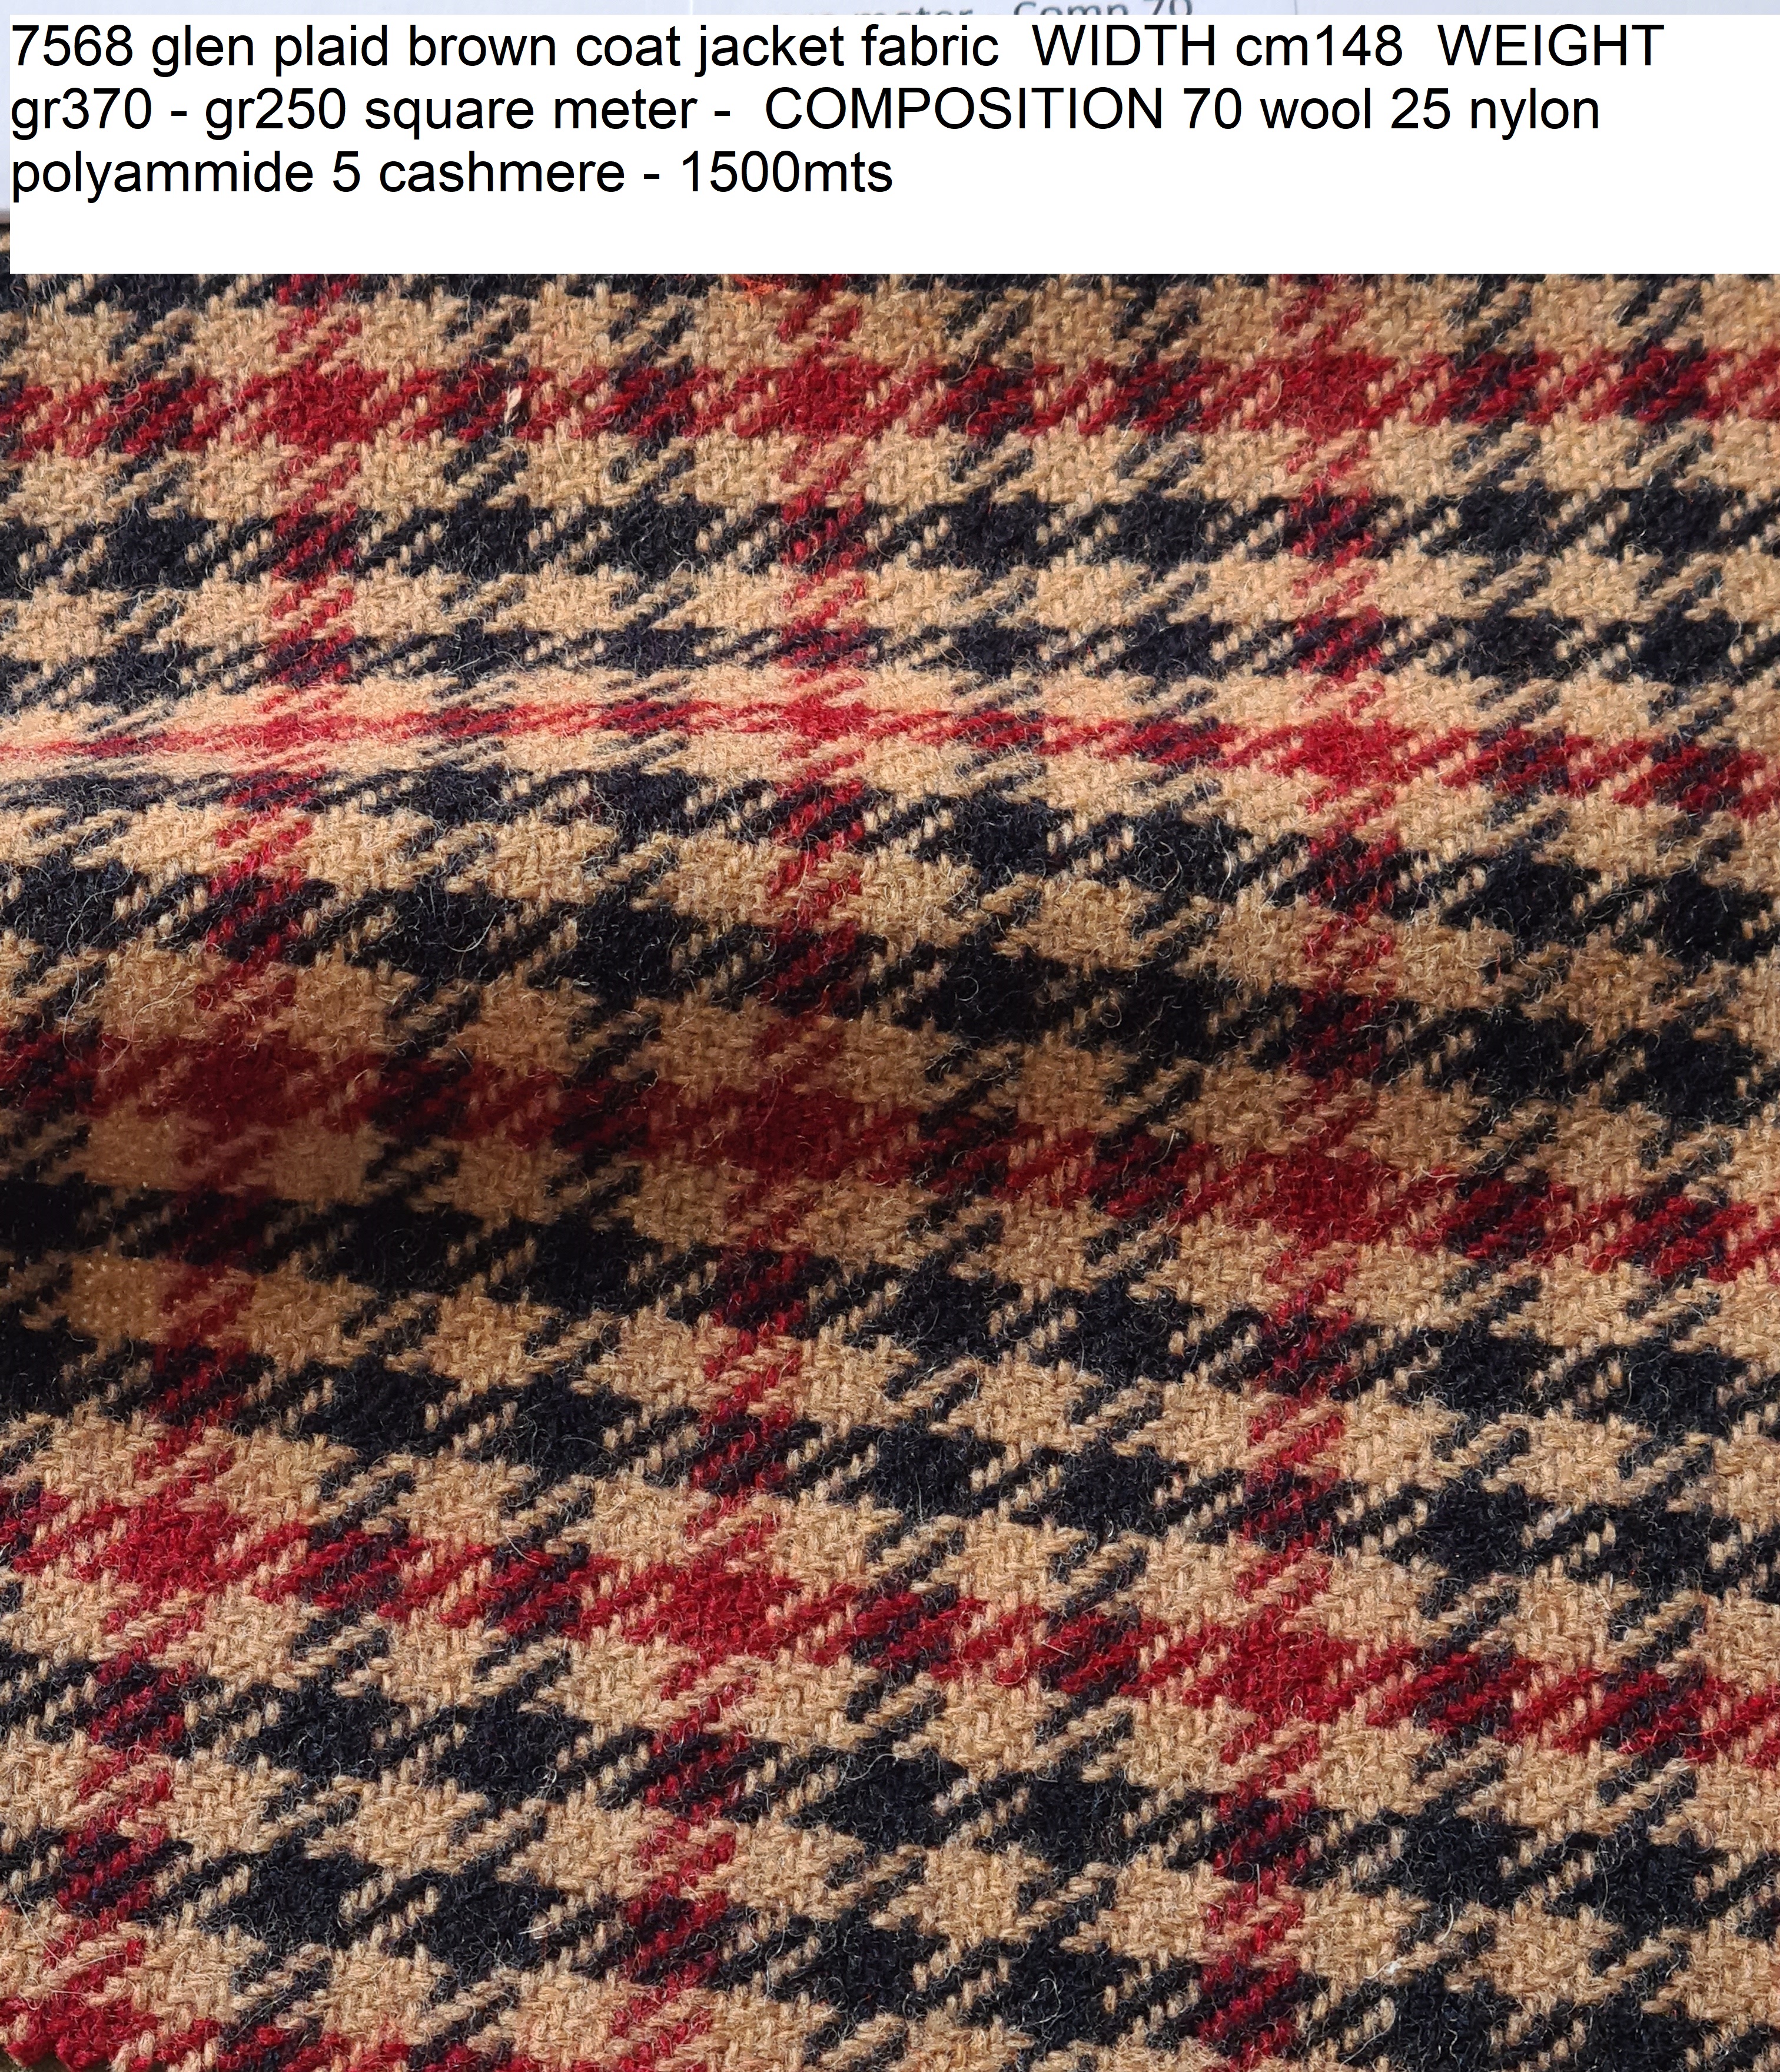 7568 glen plaid brown coat jacket fabric WIDTH cm148 WEIGHT gr370 - gr250 square meter - COMPOSITION 70 wool 25 nylon polyammide 5 cashmere - 1500mts